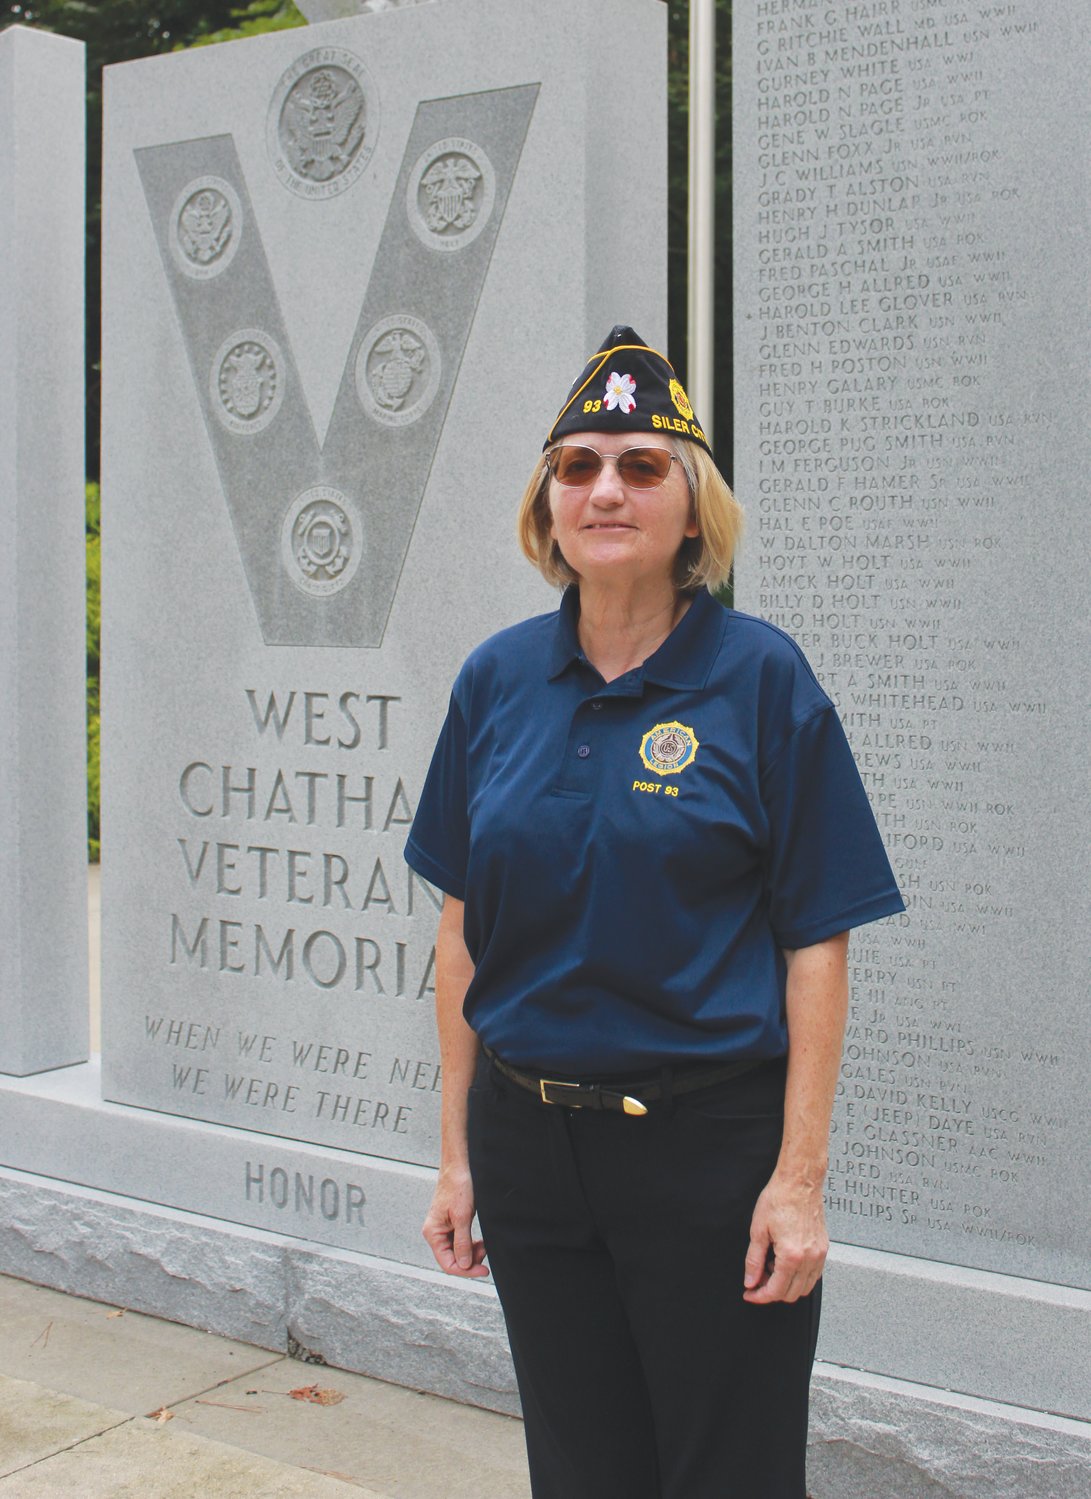 American Legion Post 93 Commander Carin O’Brien poses for a portrait next to the West Chatham Veterans Memorial at Bray Park in Siler City. O’Brien is the first female commander for Post 93.